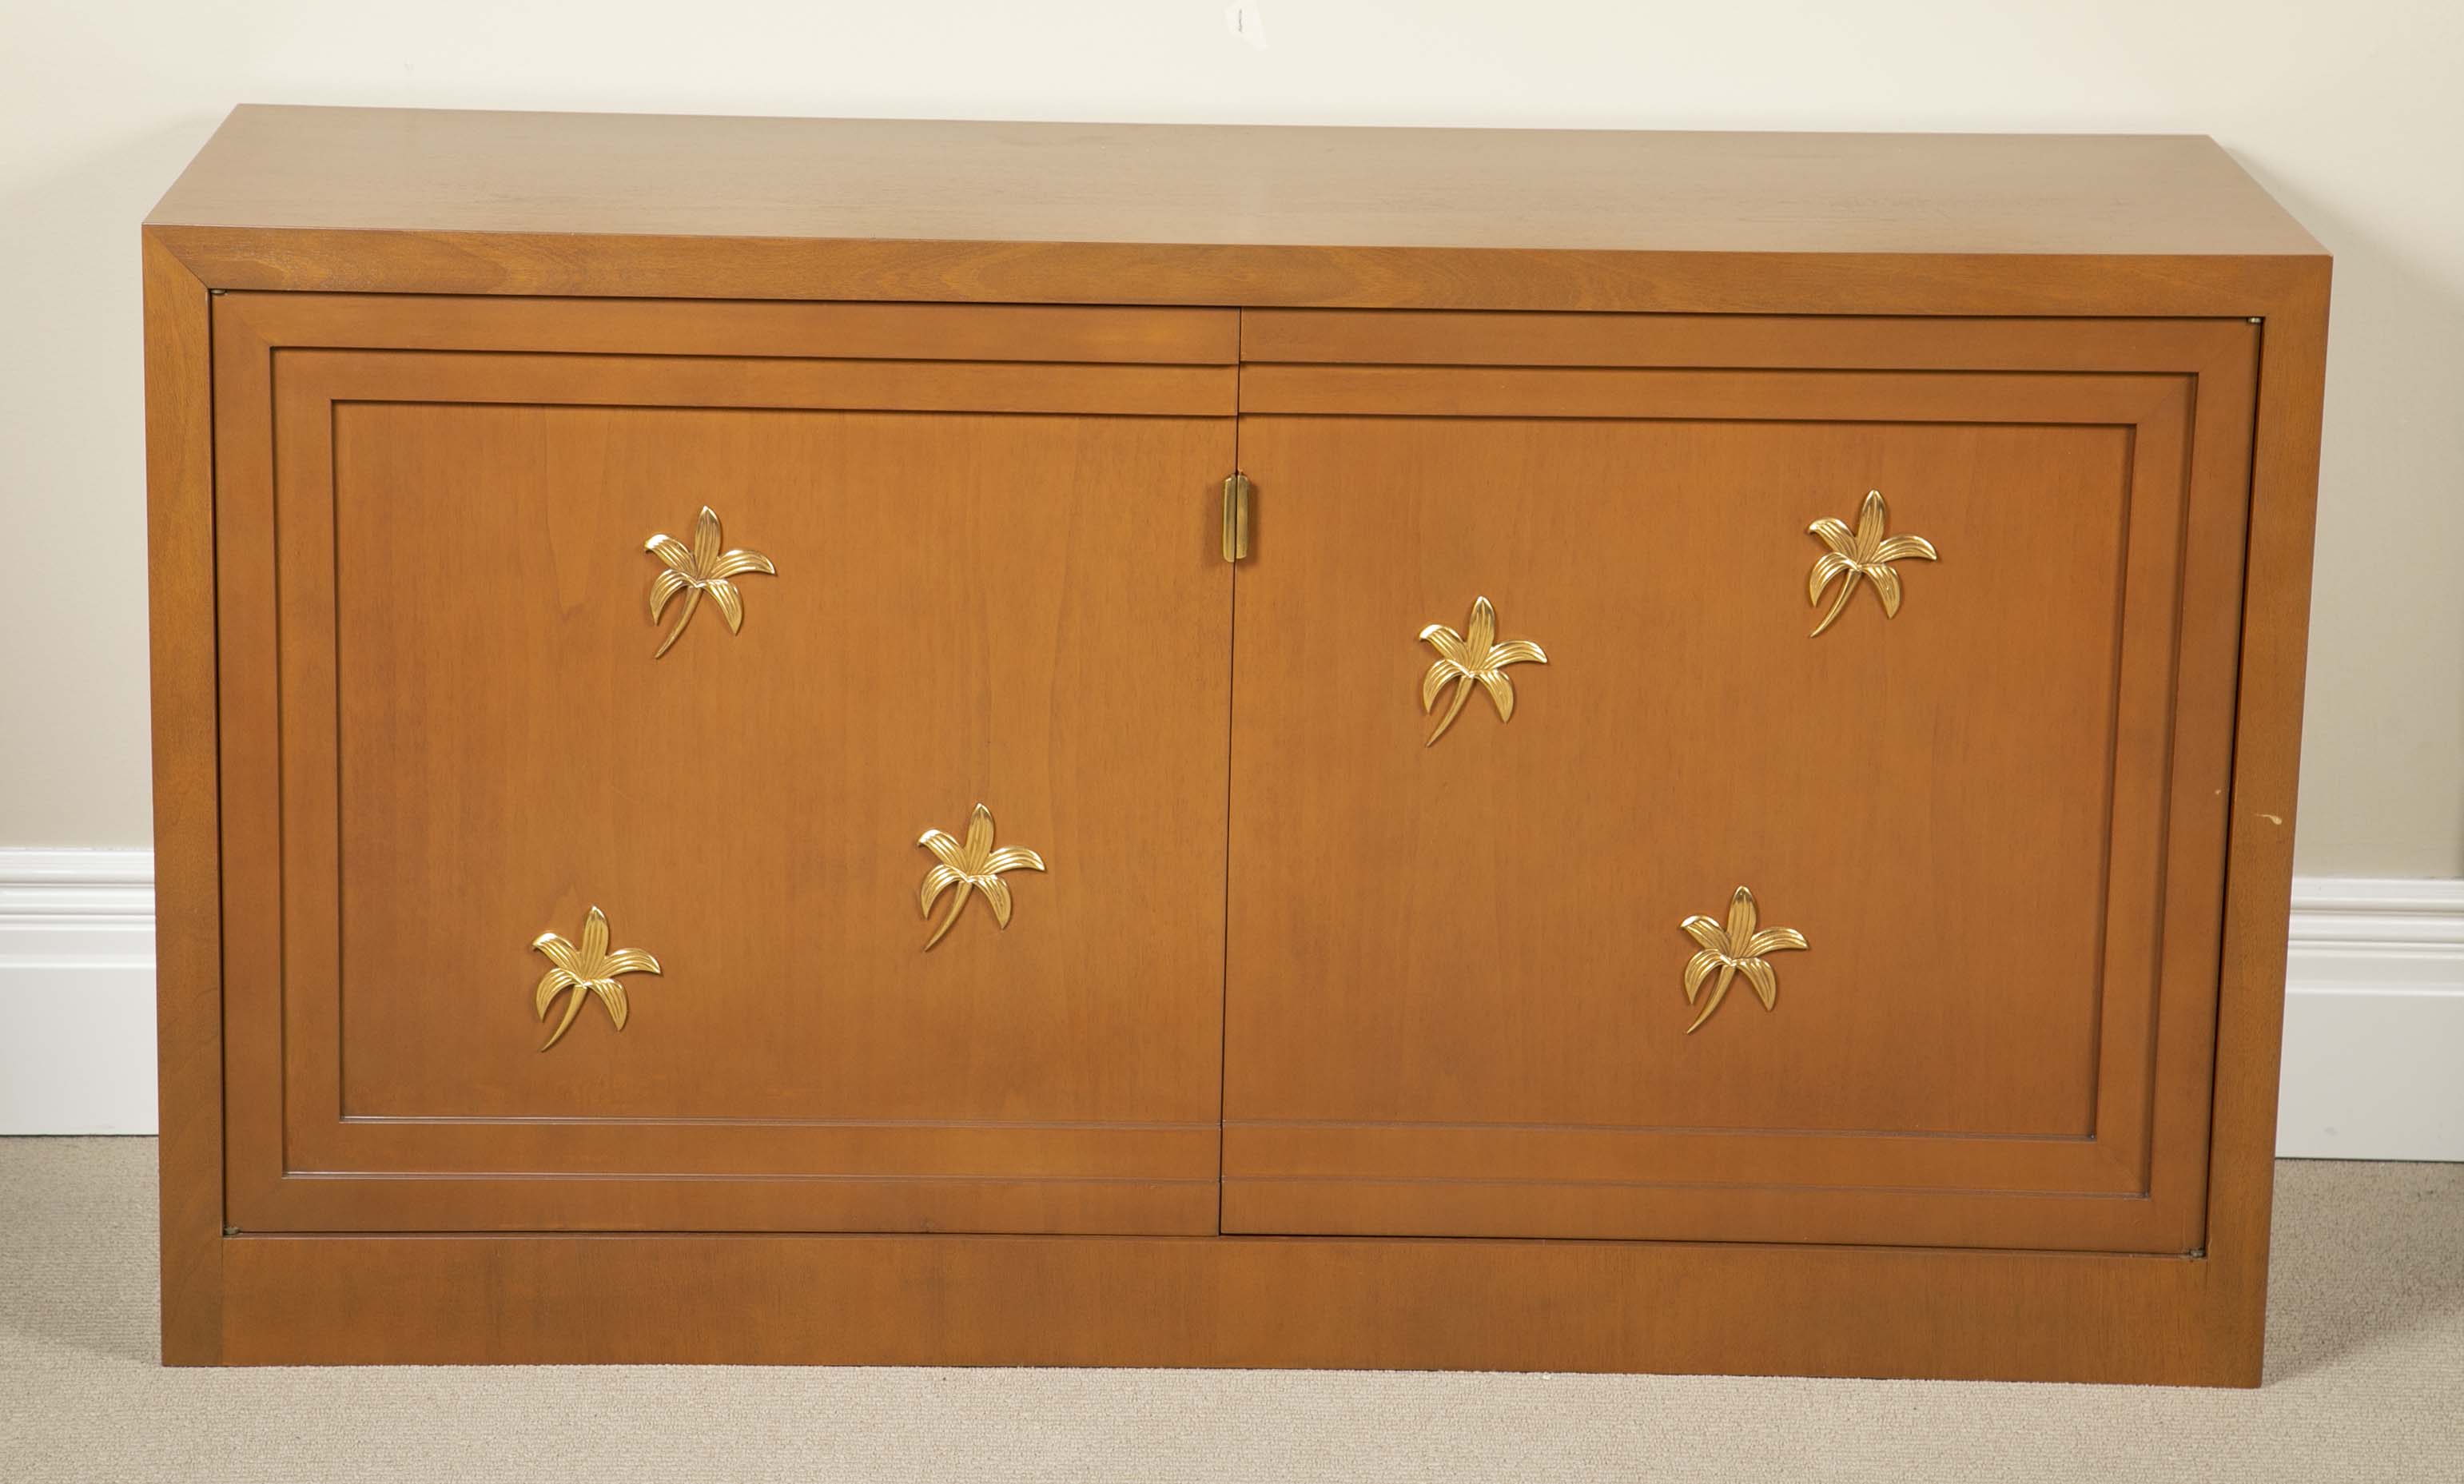 A Pair of T-H Robsjohn-Gibbings Cabinets for Sarifdis of Athens.